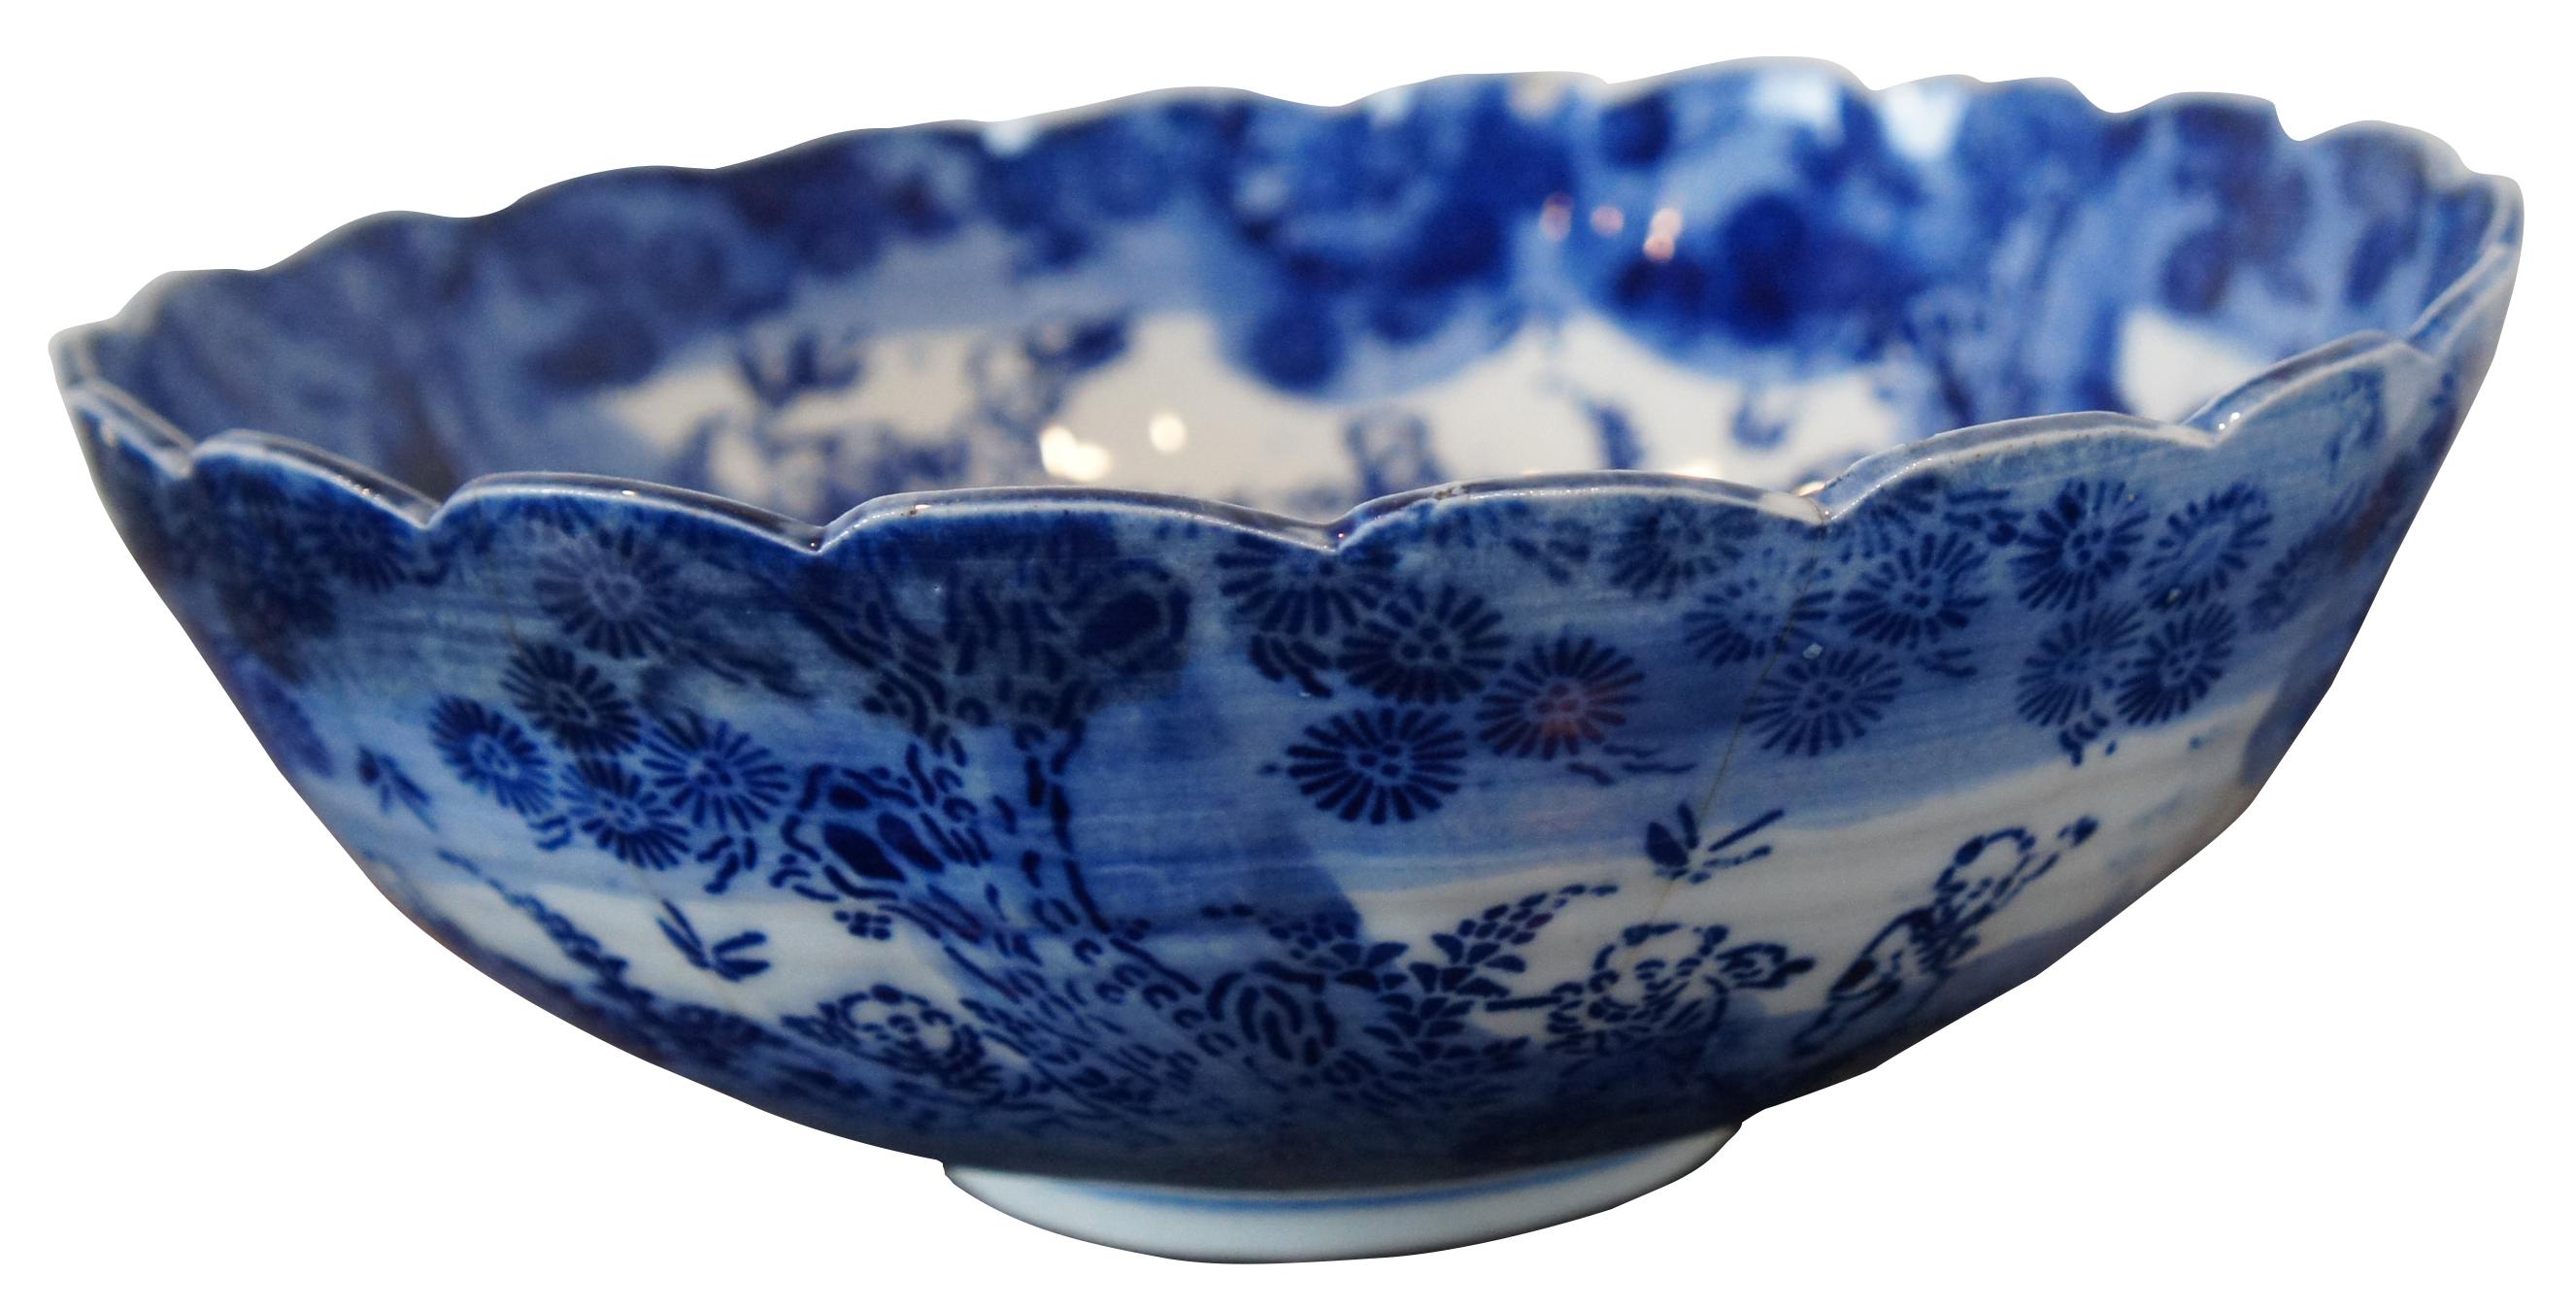 Antique turn of the century flow blue Chinese porcelain bowl with scalloped edge, decorated with figures in a forest around a phoenix center. Measure: 10